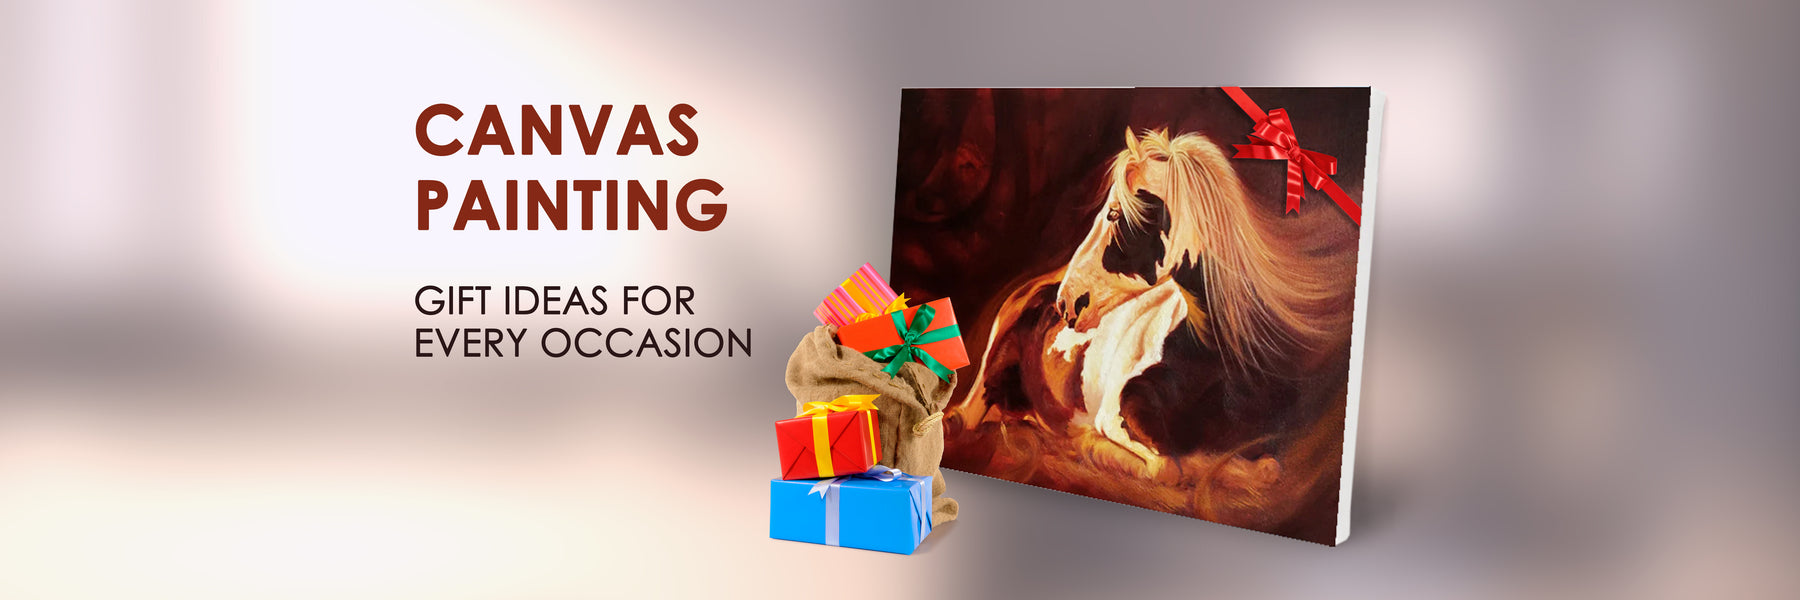 Canvas Painting Gift Ideas for Every Occasion